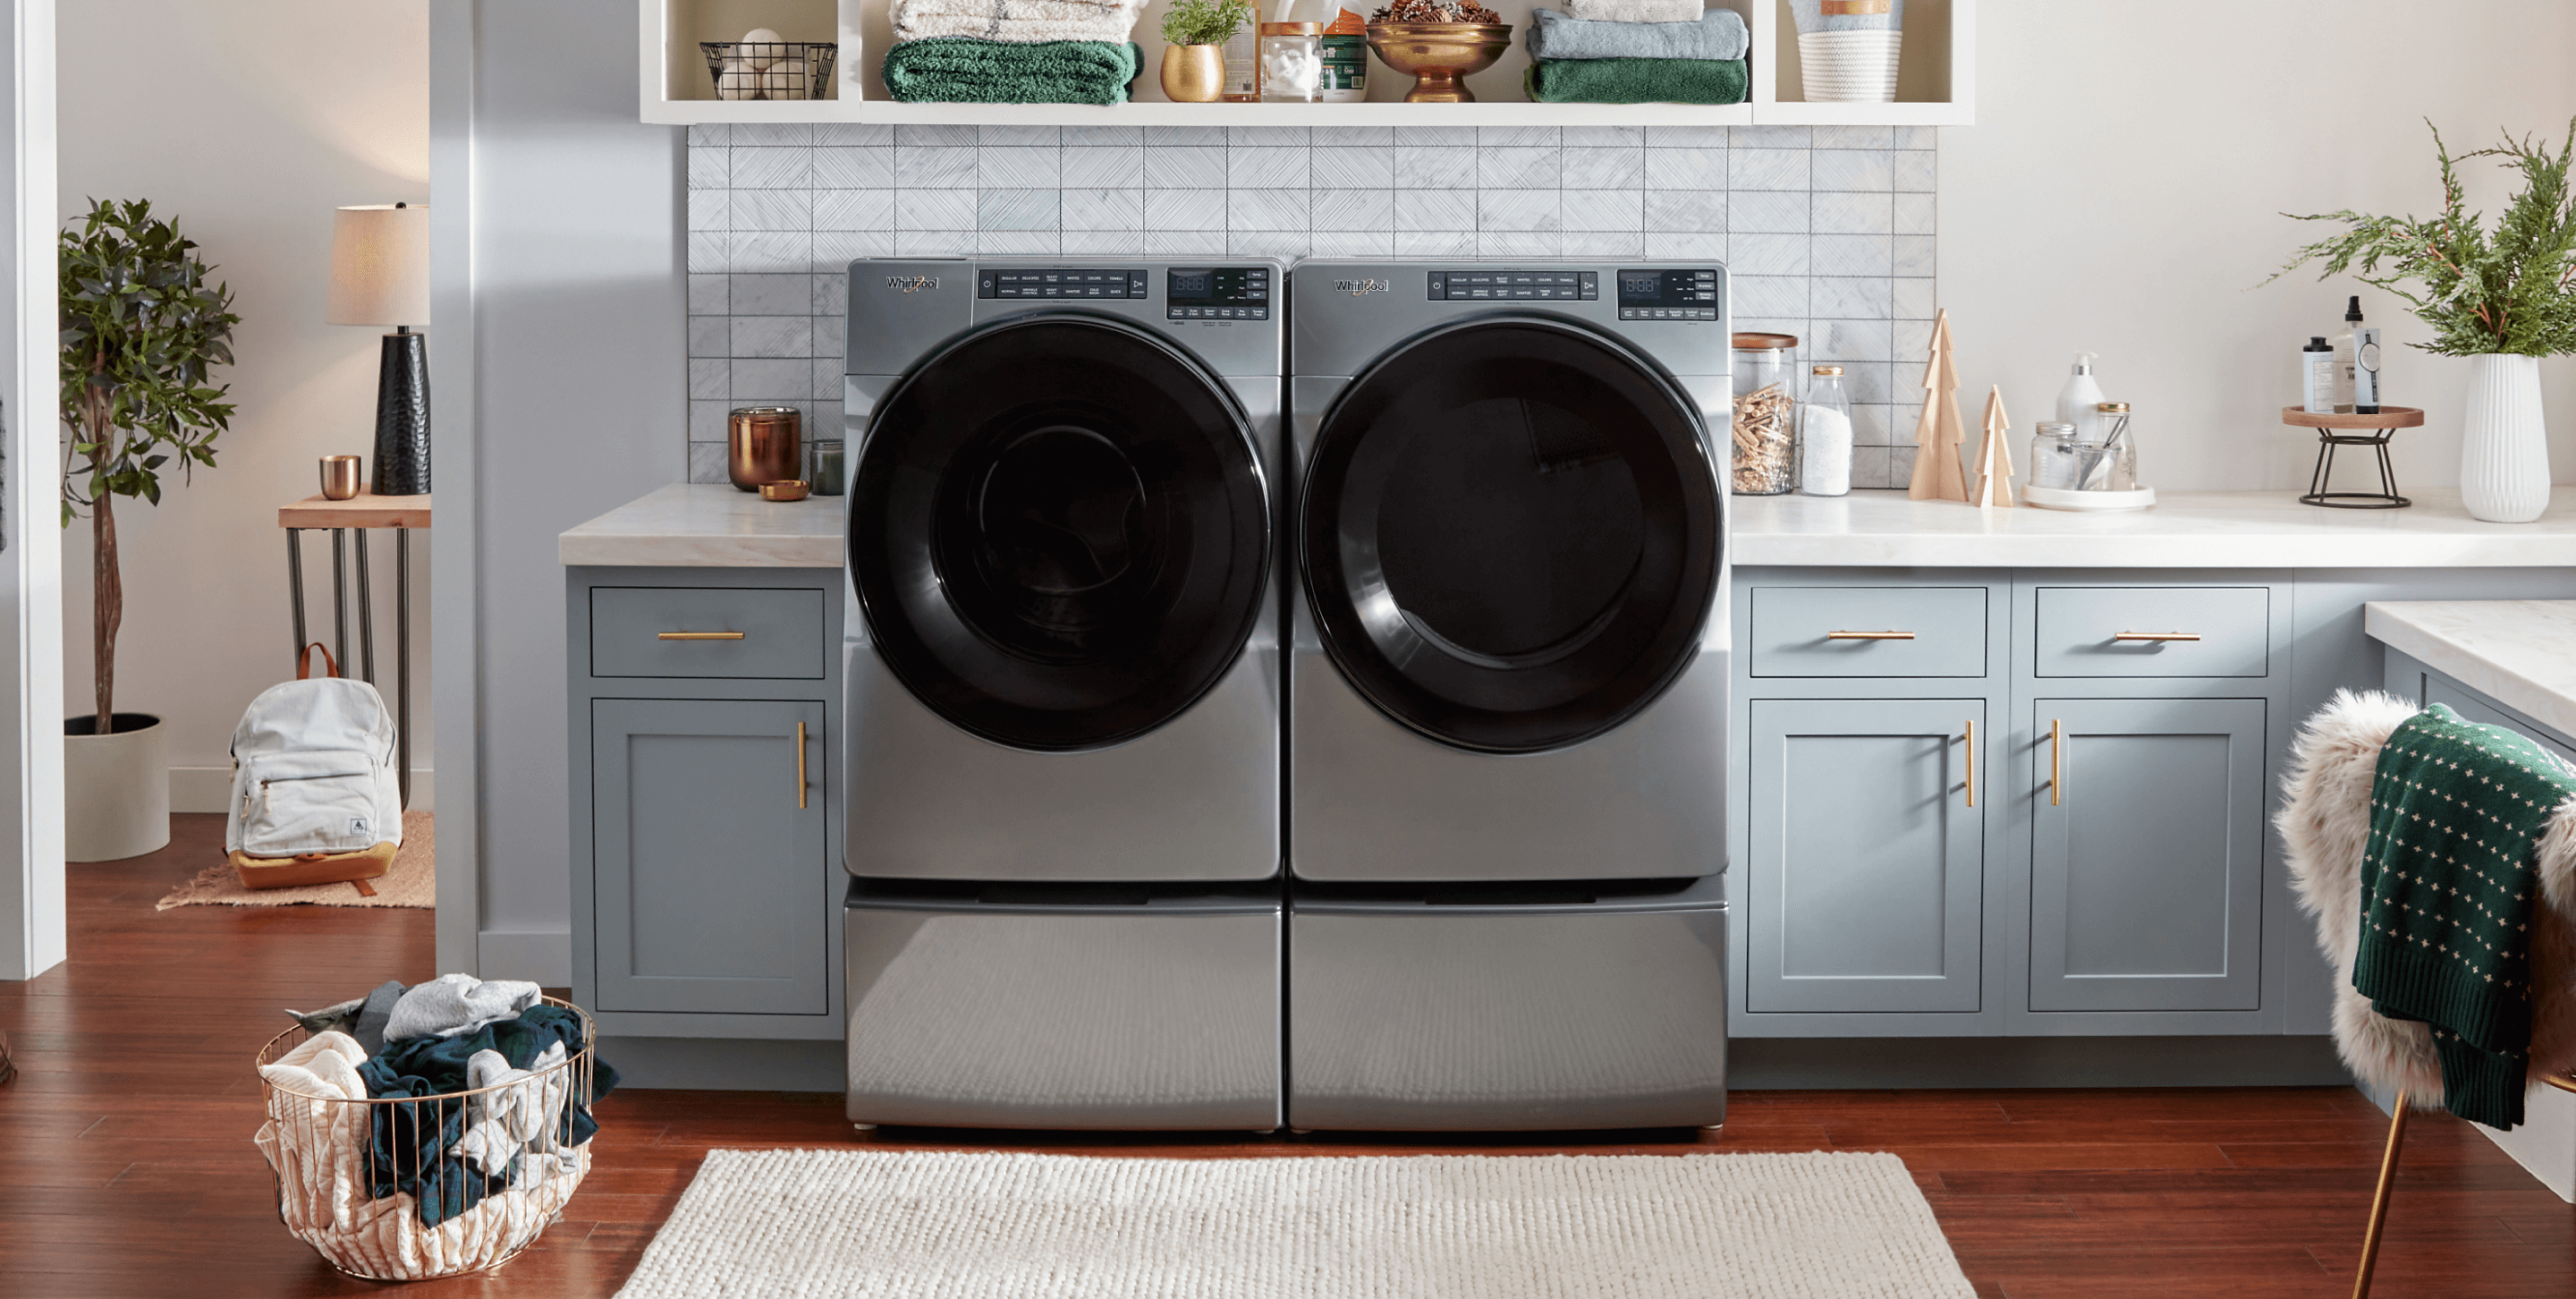 Home, Kitchen & Laundry Appliances & Products